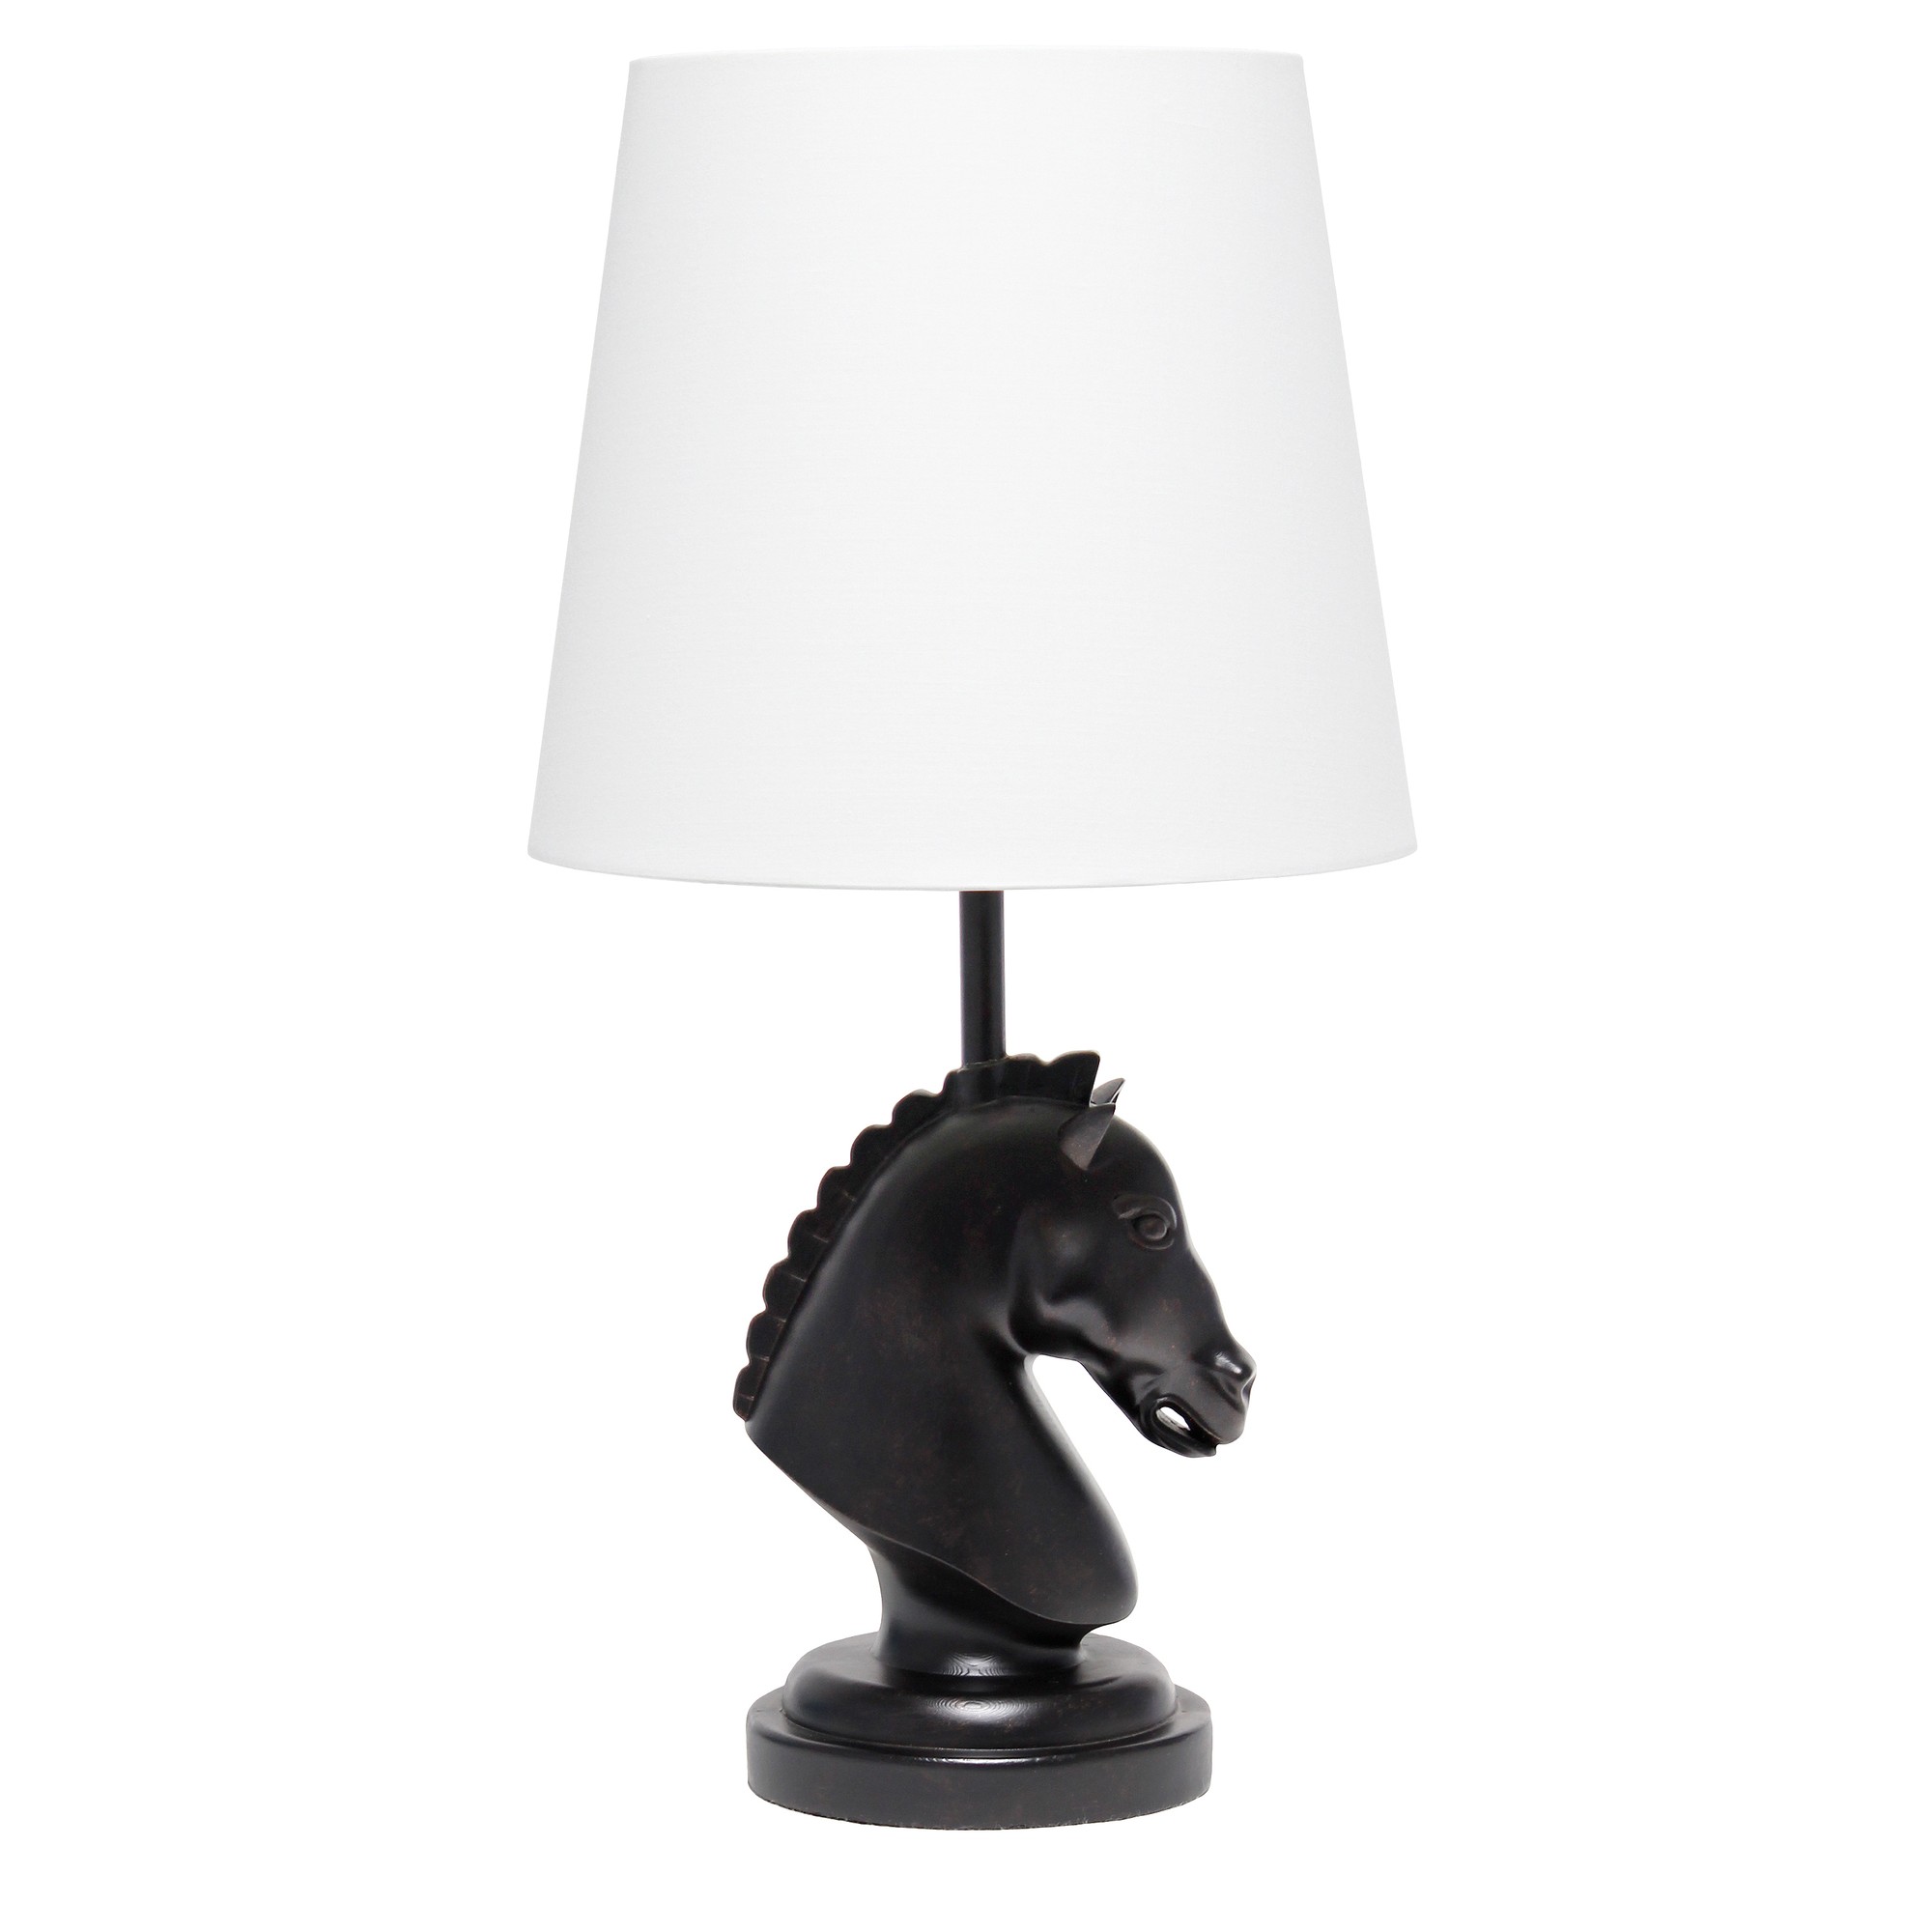 17.25" Tall Chess Horse Table Lamp Wht Shade, Blk